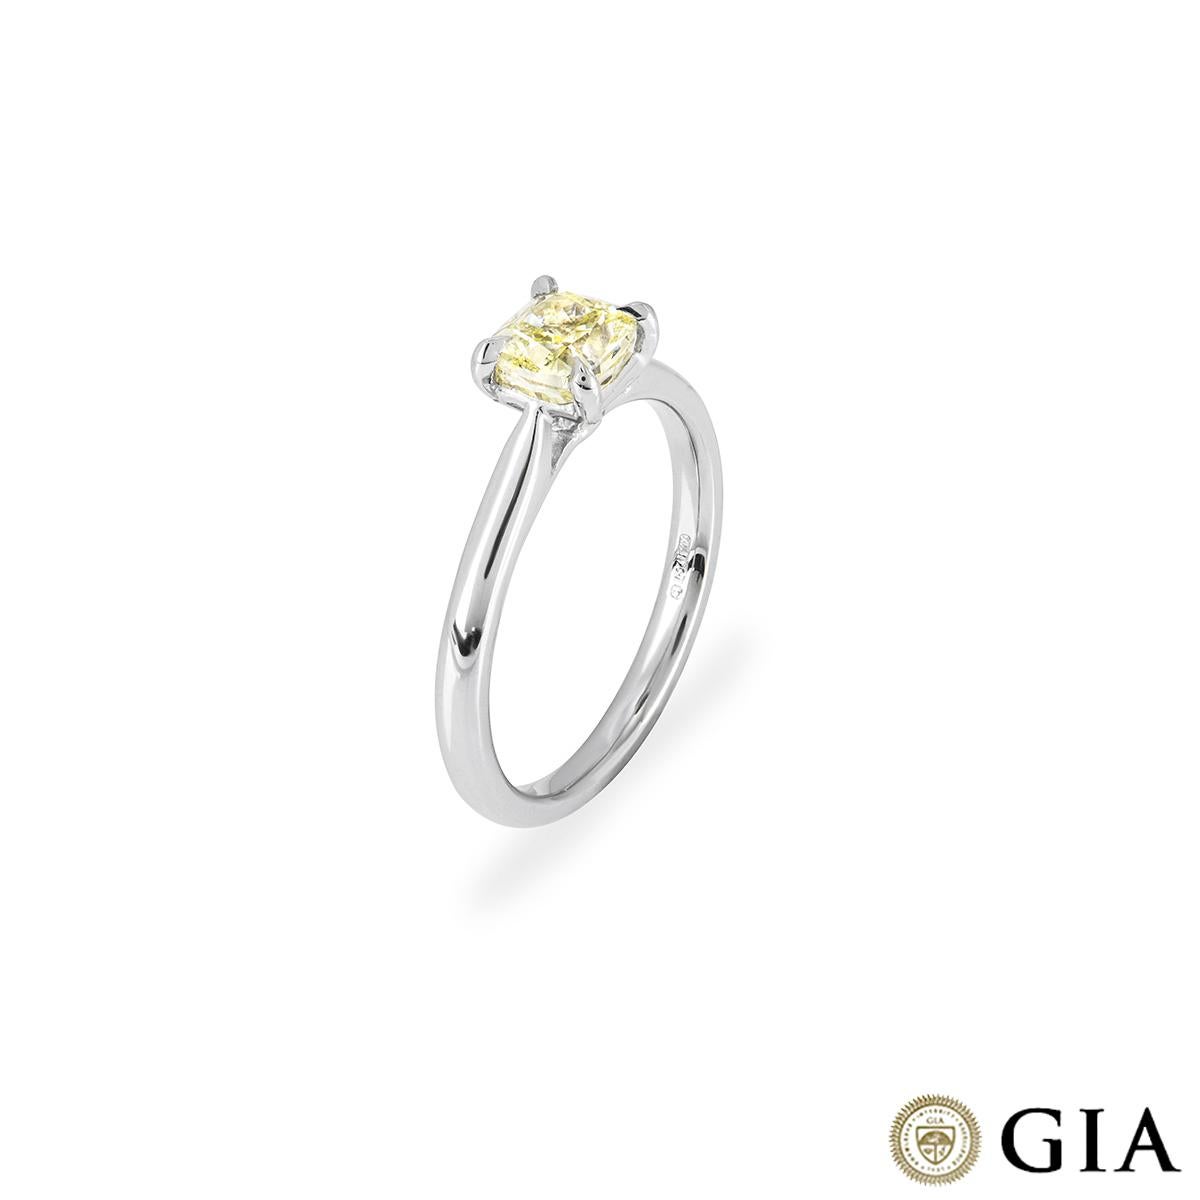 A platinum cushion cut fancy yellow diamond ring. The ring features a cushion cut diamond set to centre in a four claw setting. The diamond has a weight of 1.01ct with a fancy yellow colour with even distribution and SI1 clarity. The ring is